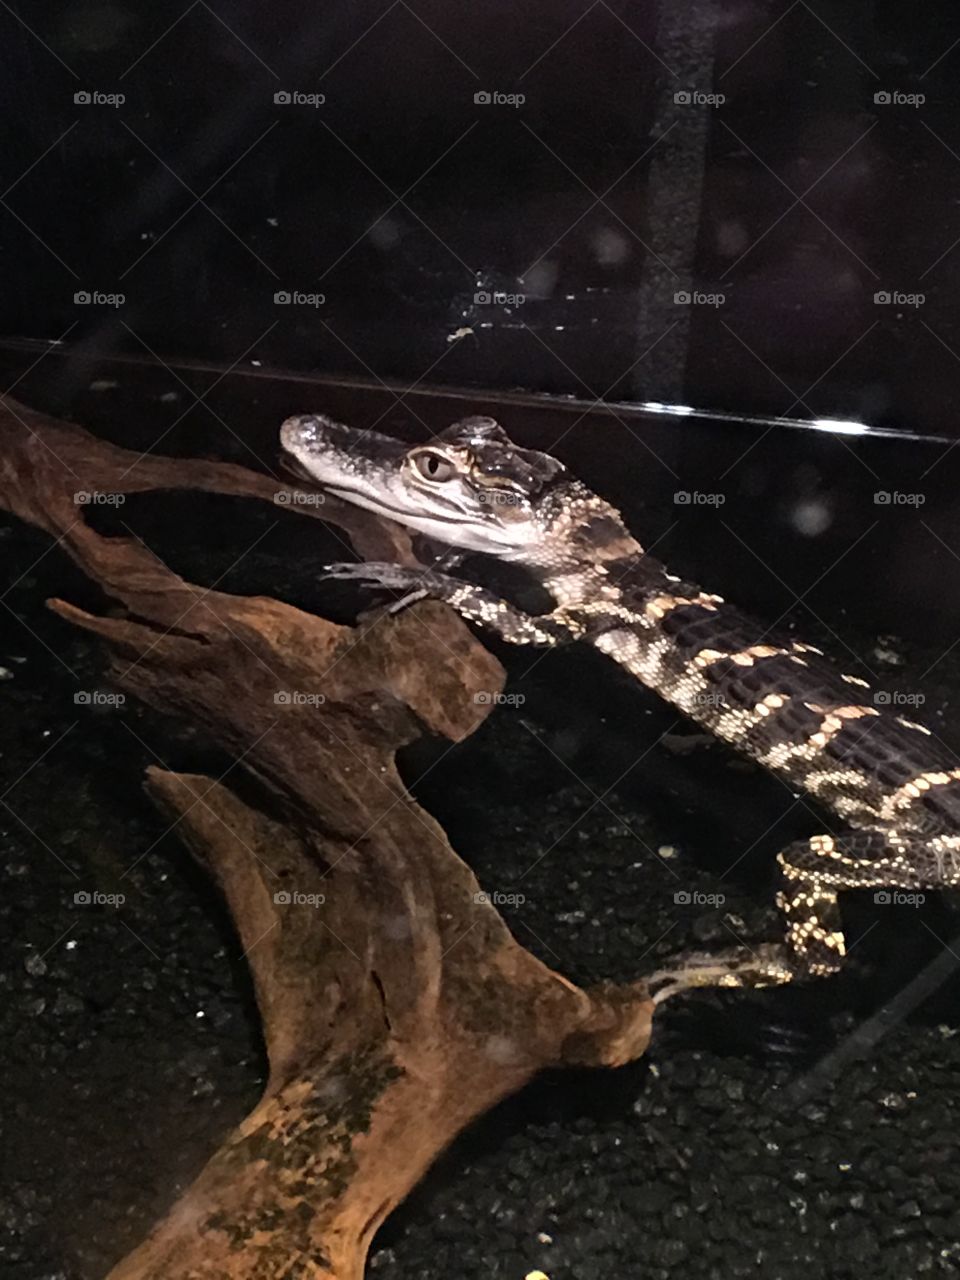 A baby alligator resting on a tree branch in one of the exhibits at an Aquarium. 